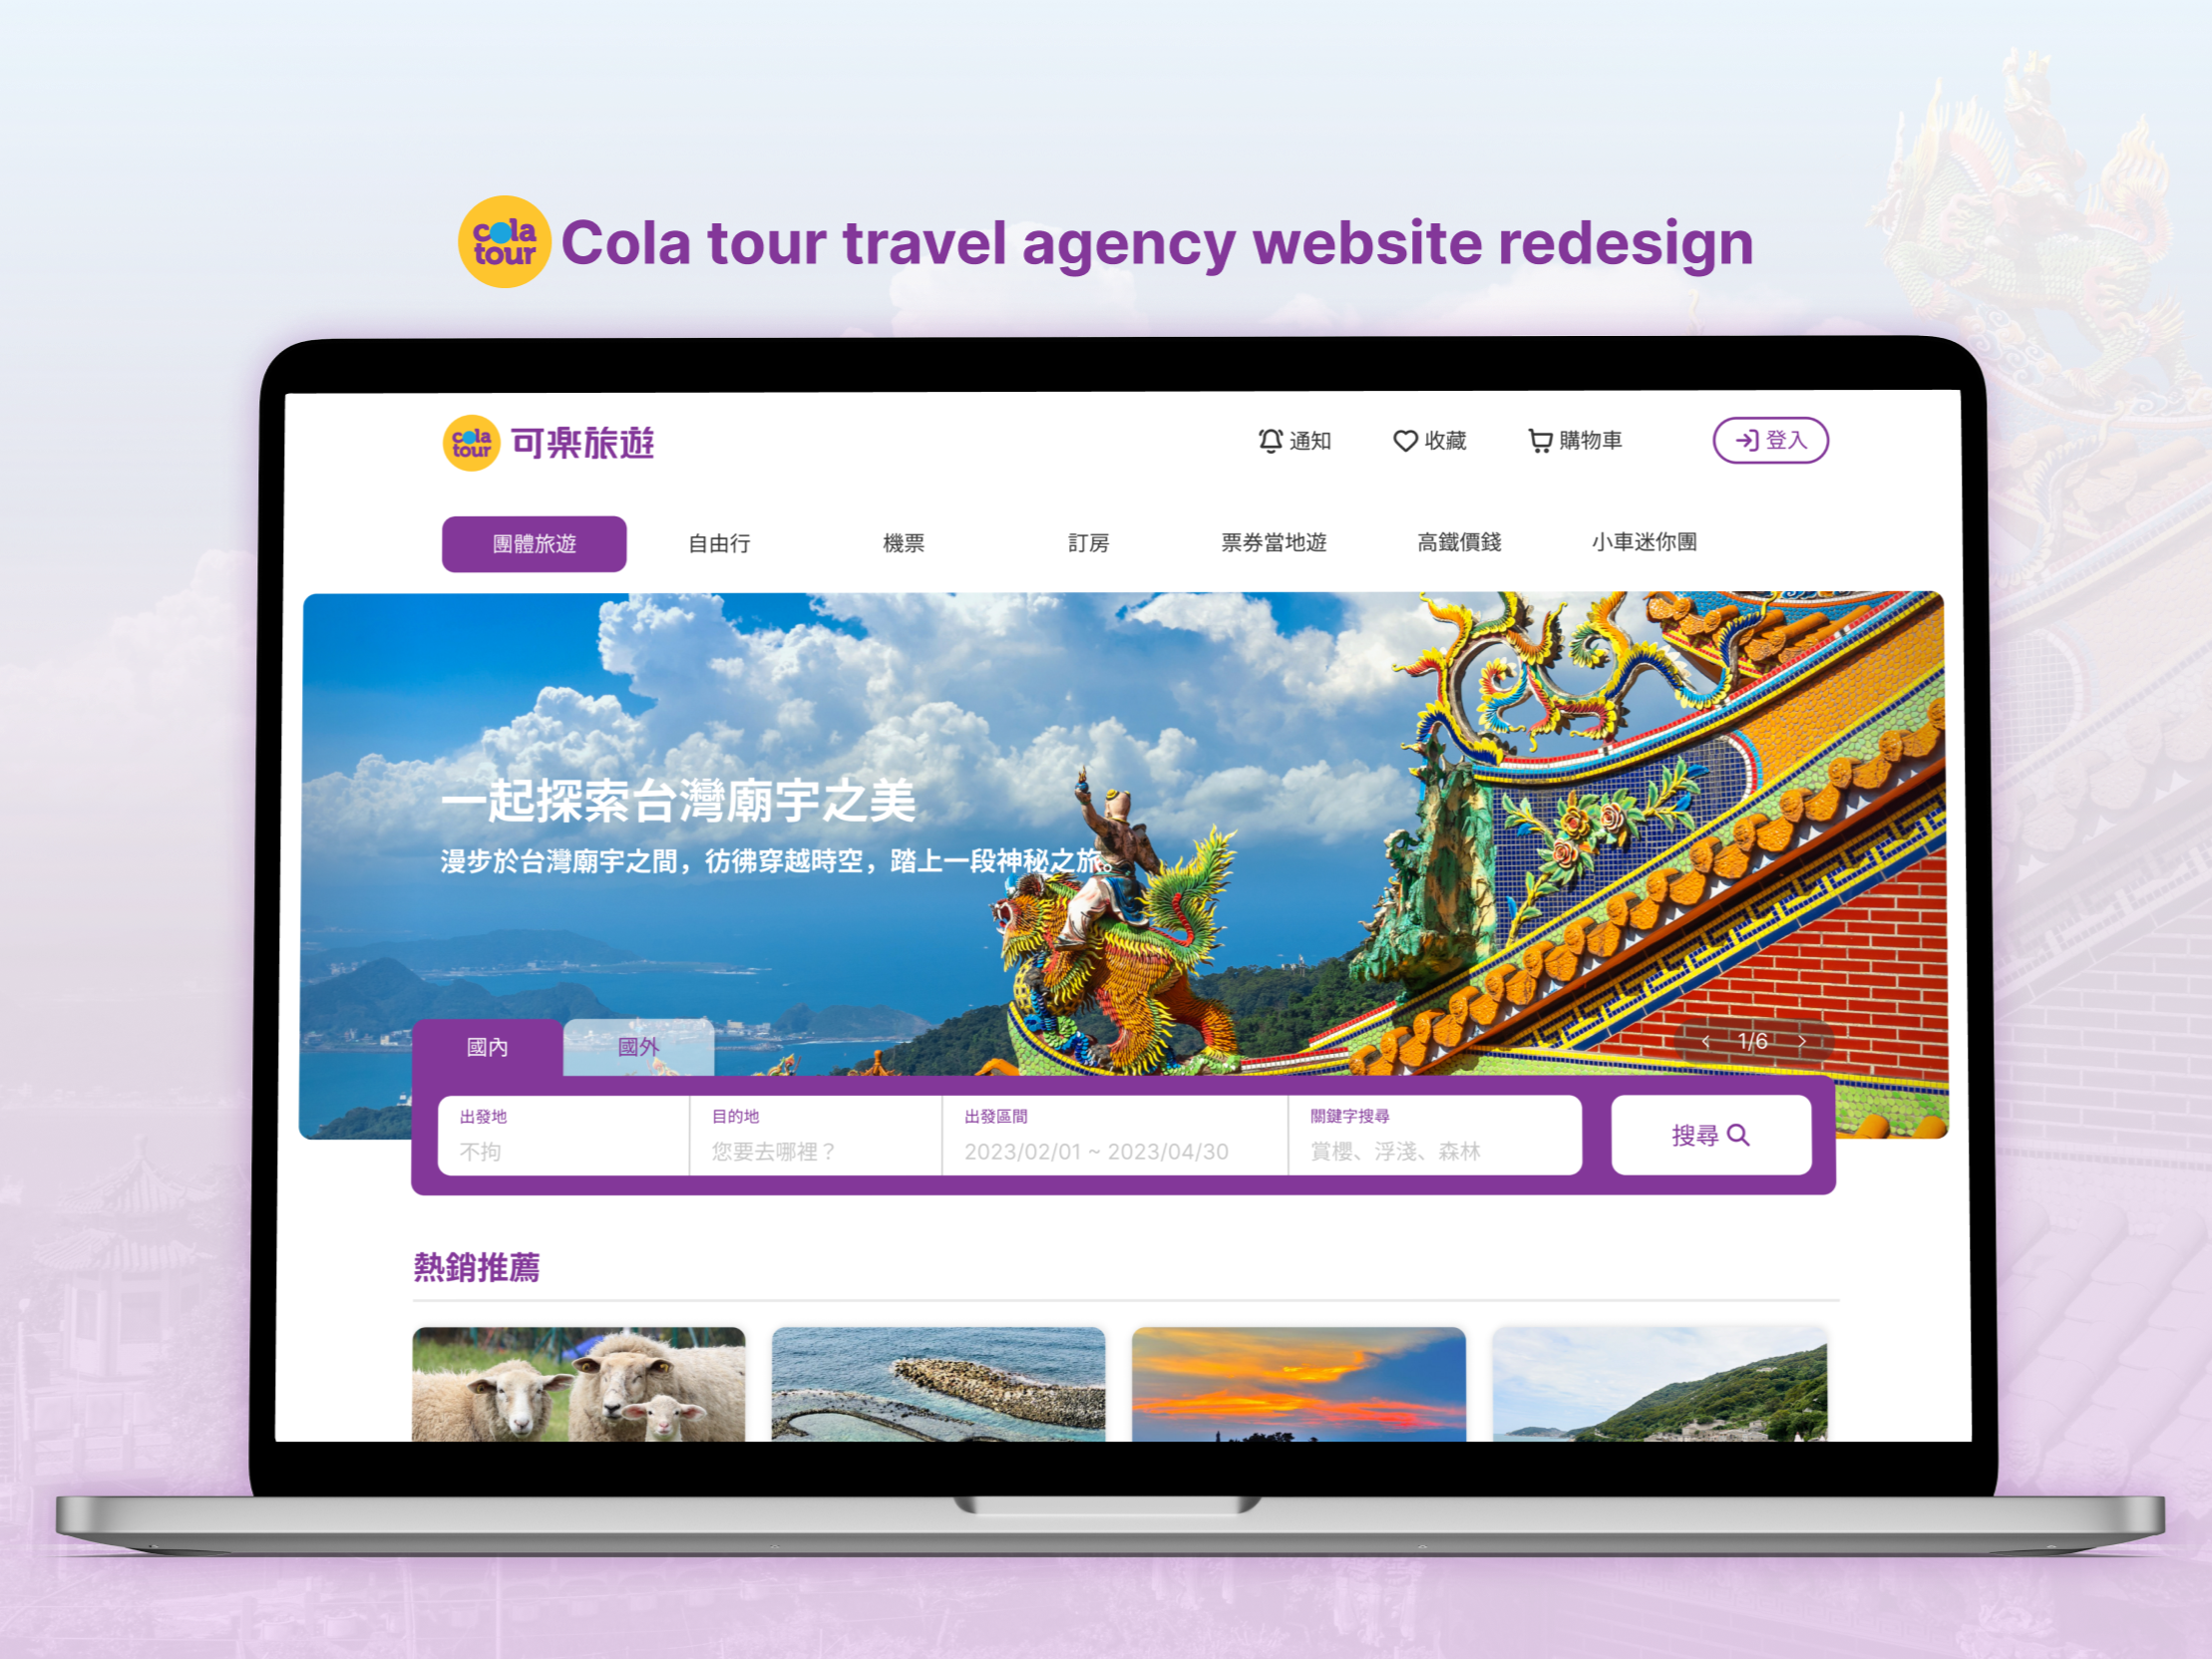 Cover of Cola tour travel agency website redesign.